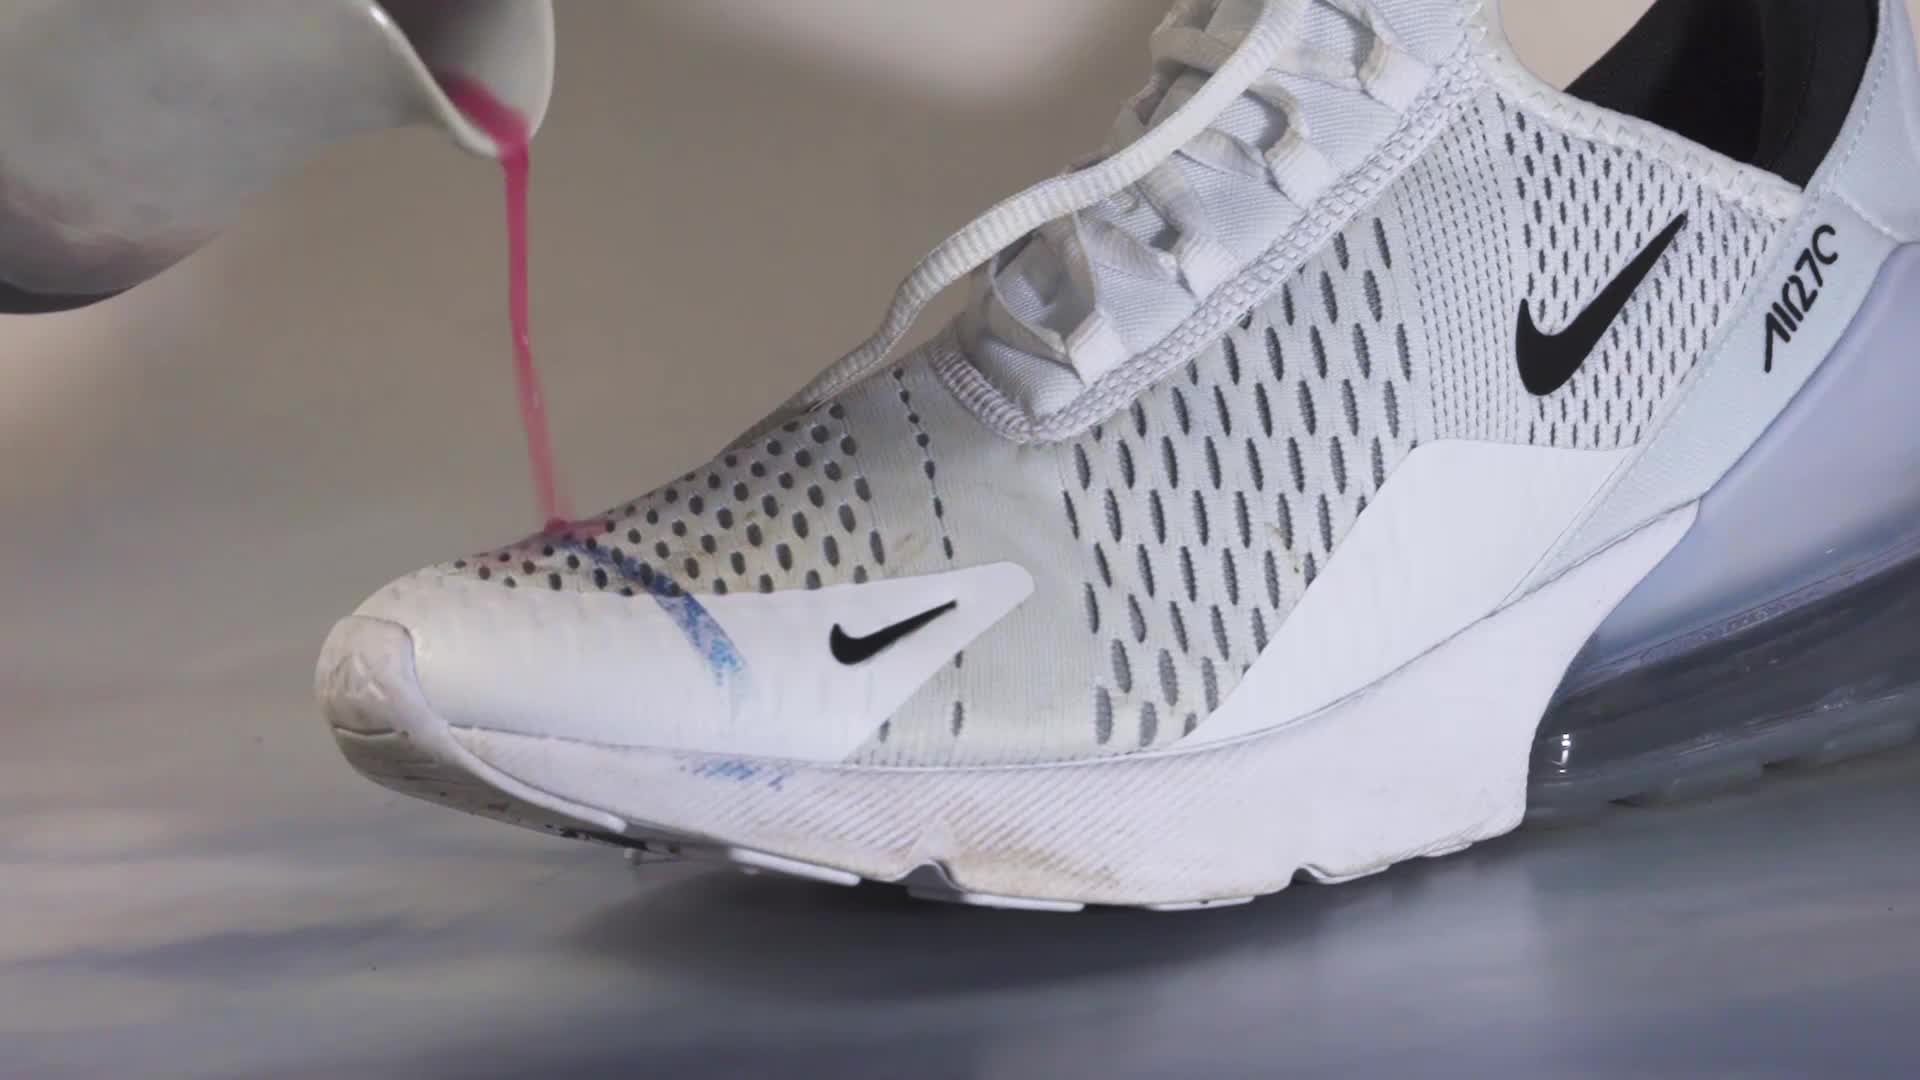 Nike Air Max 270 Review, Facts, Comparison